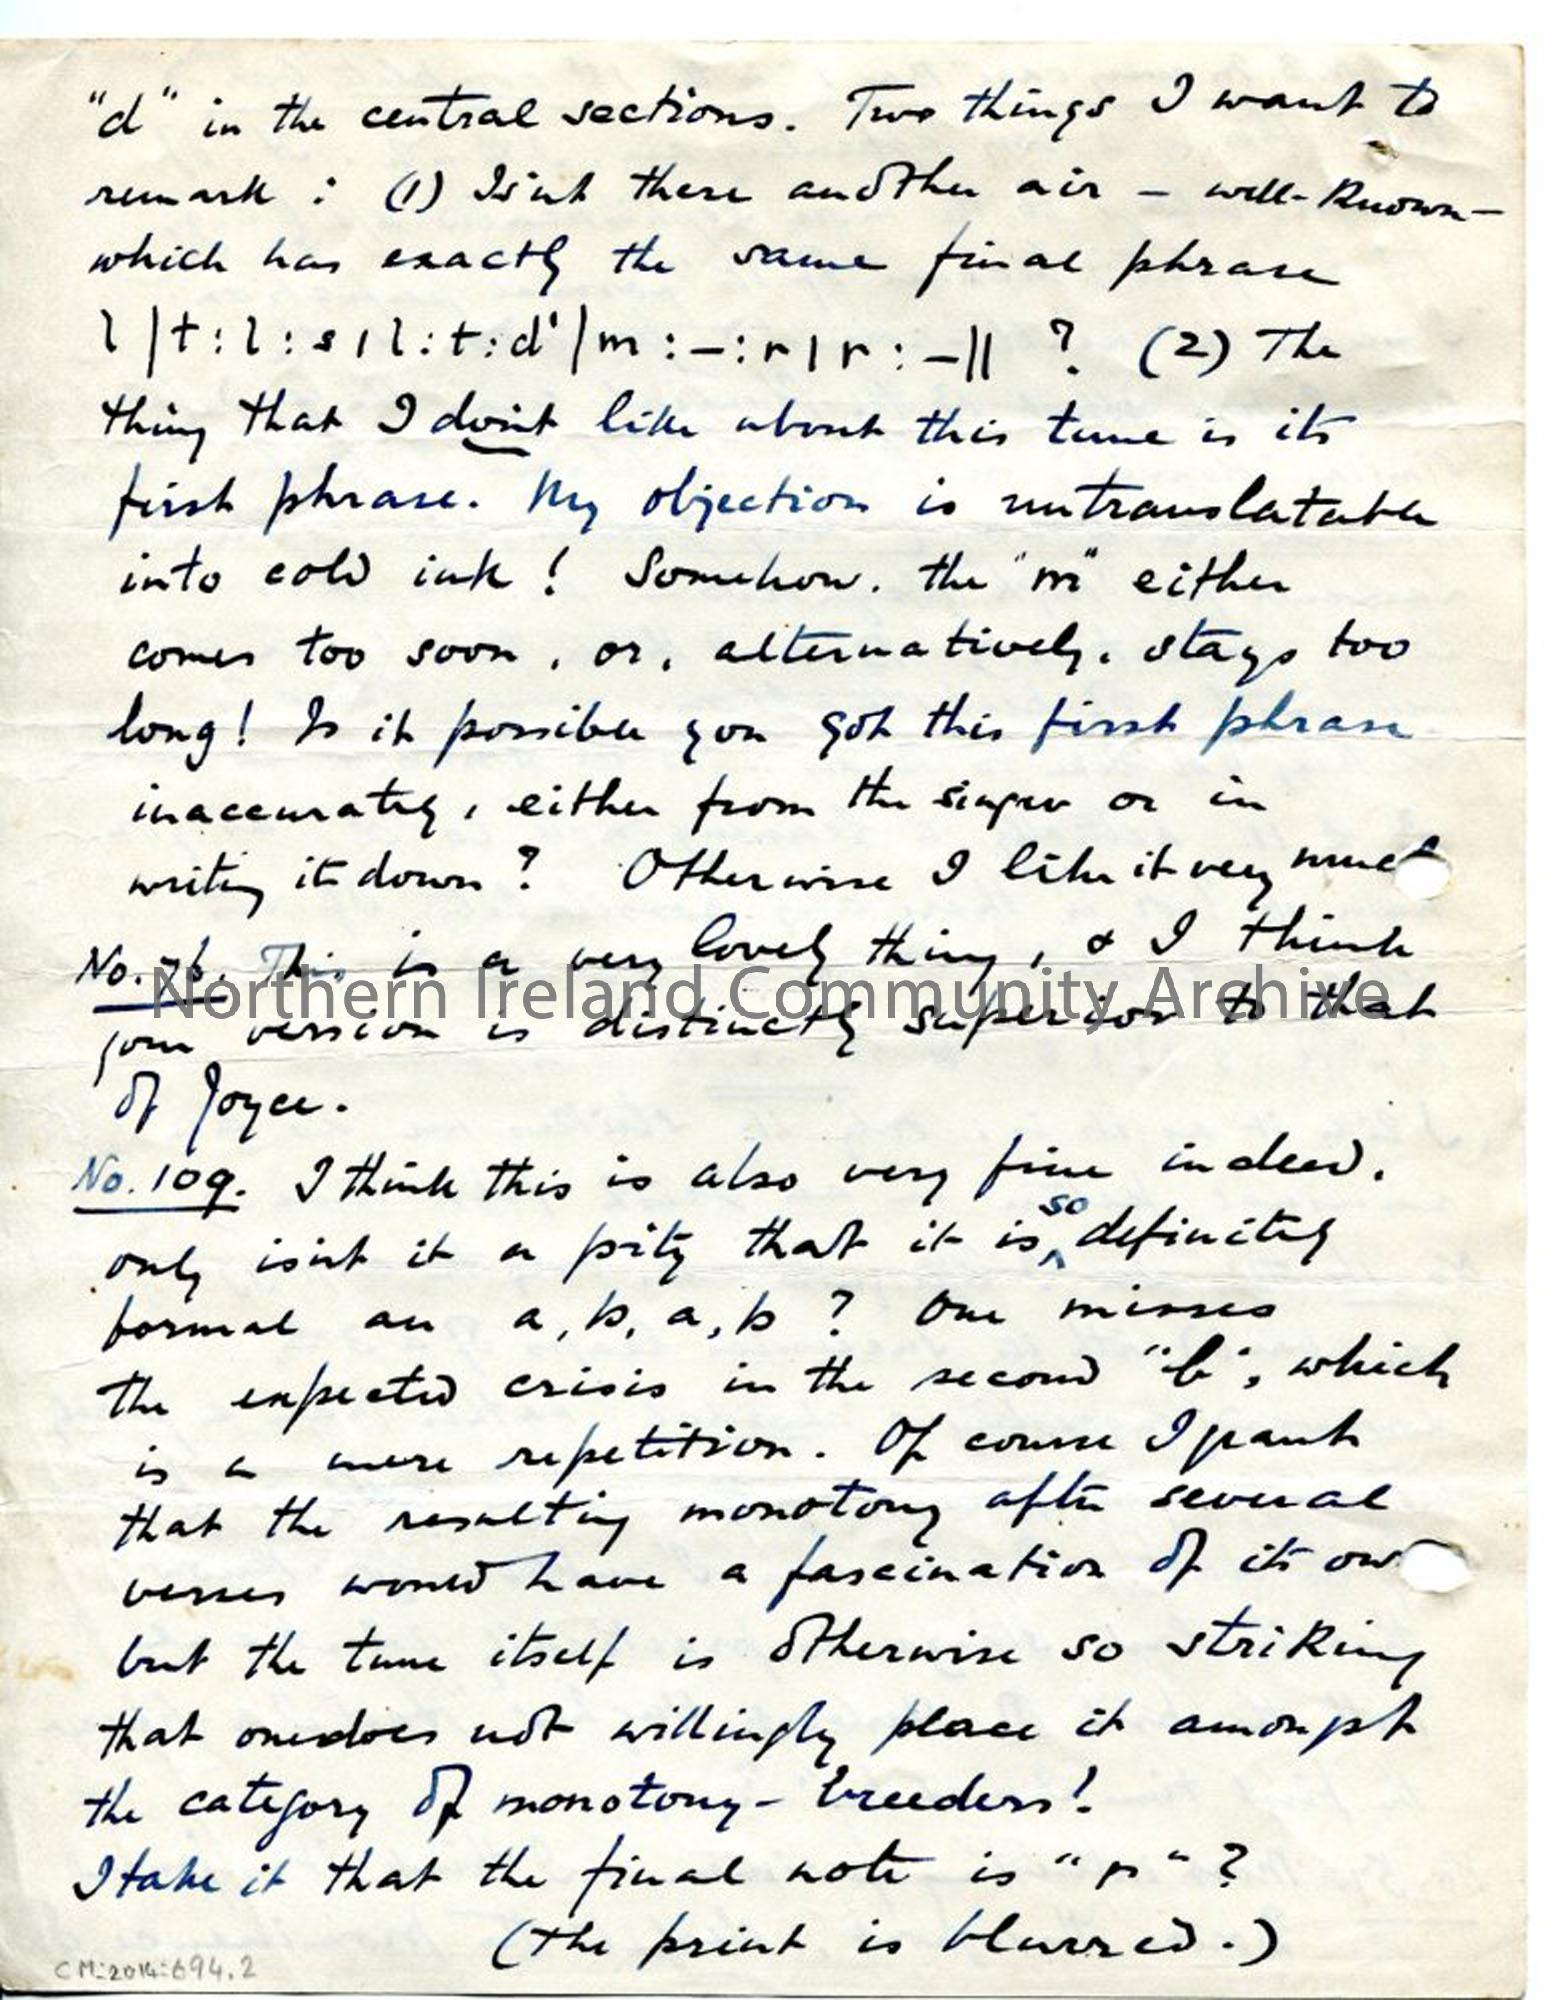 Page 4 of 12, letter from Norman Hay, 1.2.1927